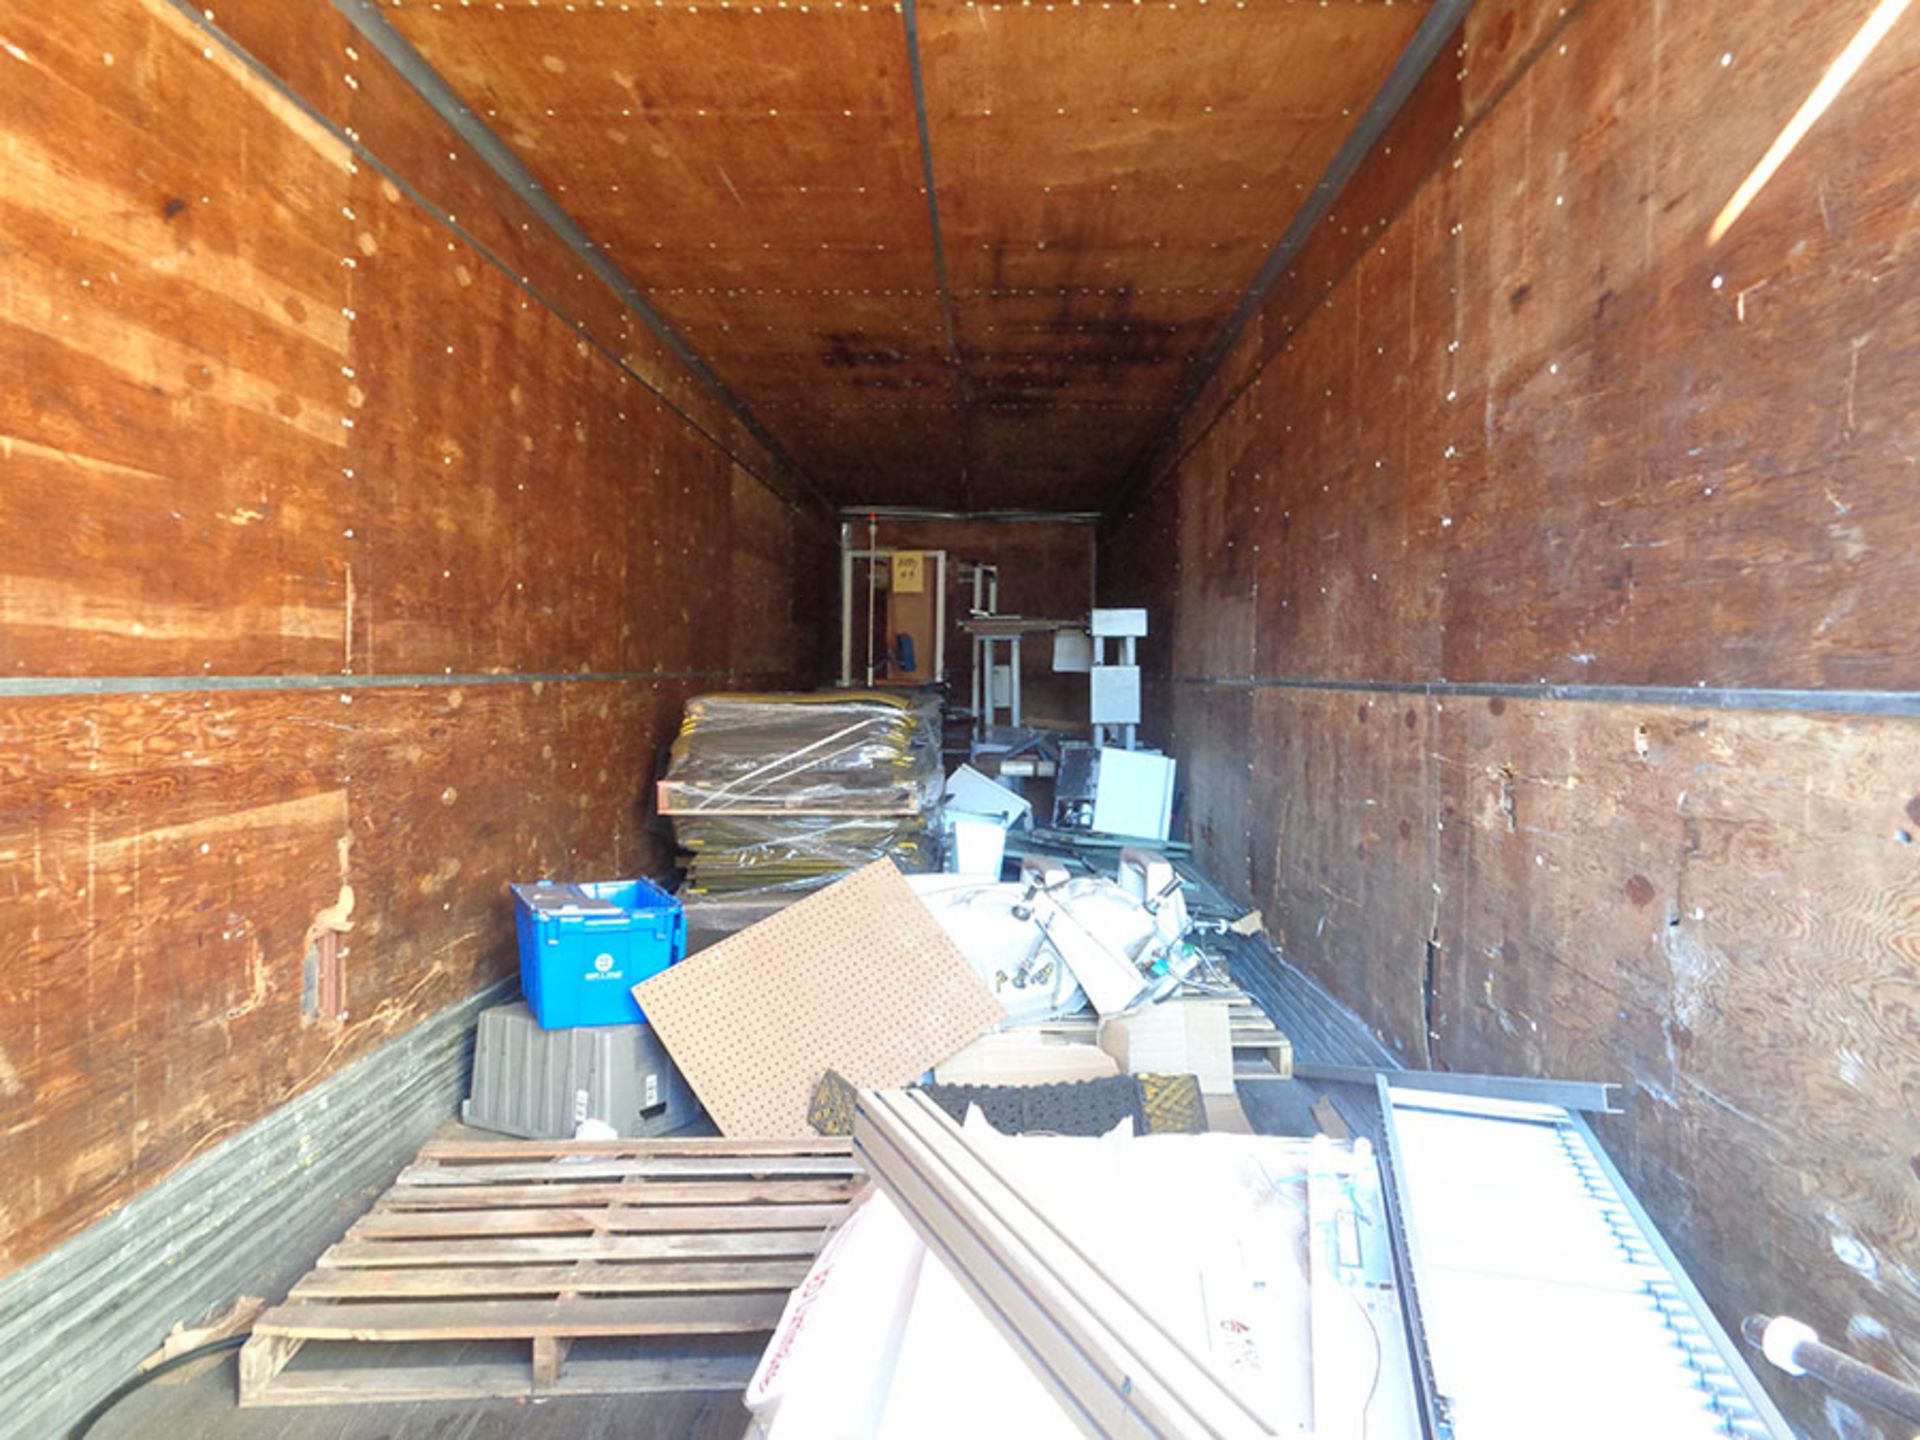 CONTENT OF VAN TRAILER; ZEBRA LABELER, ANTI FATIGUE MATS, AND JIFFY PACK STATION - Image 2 of 2